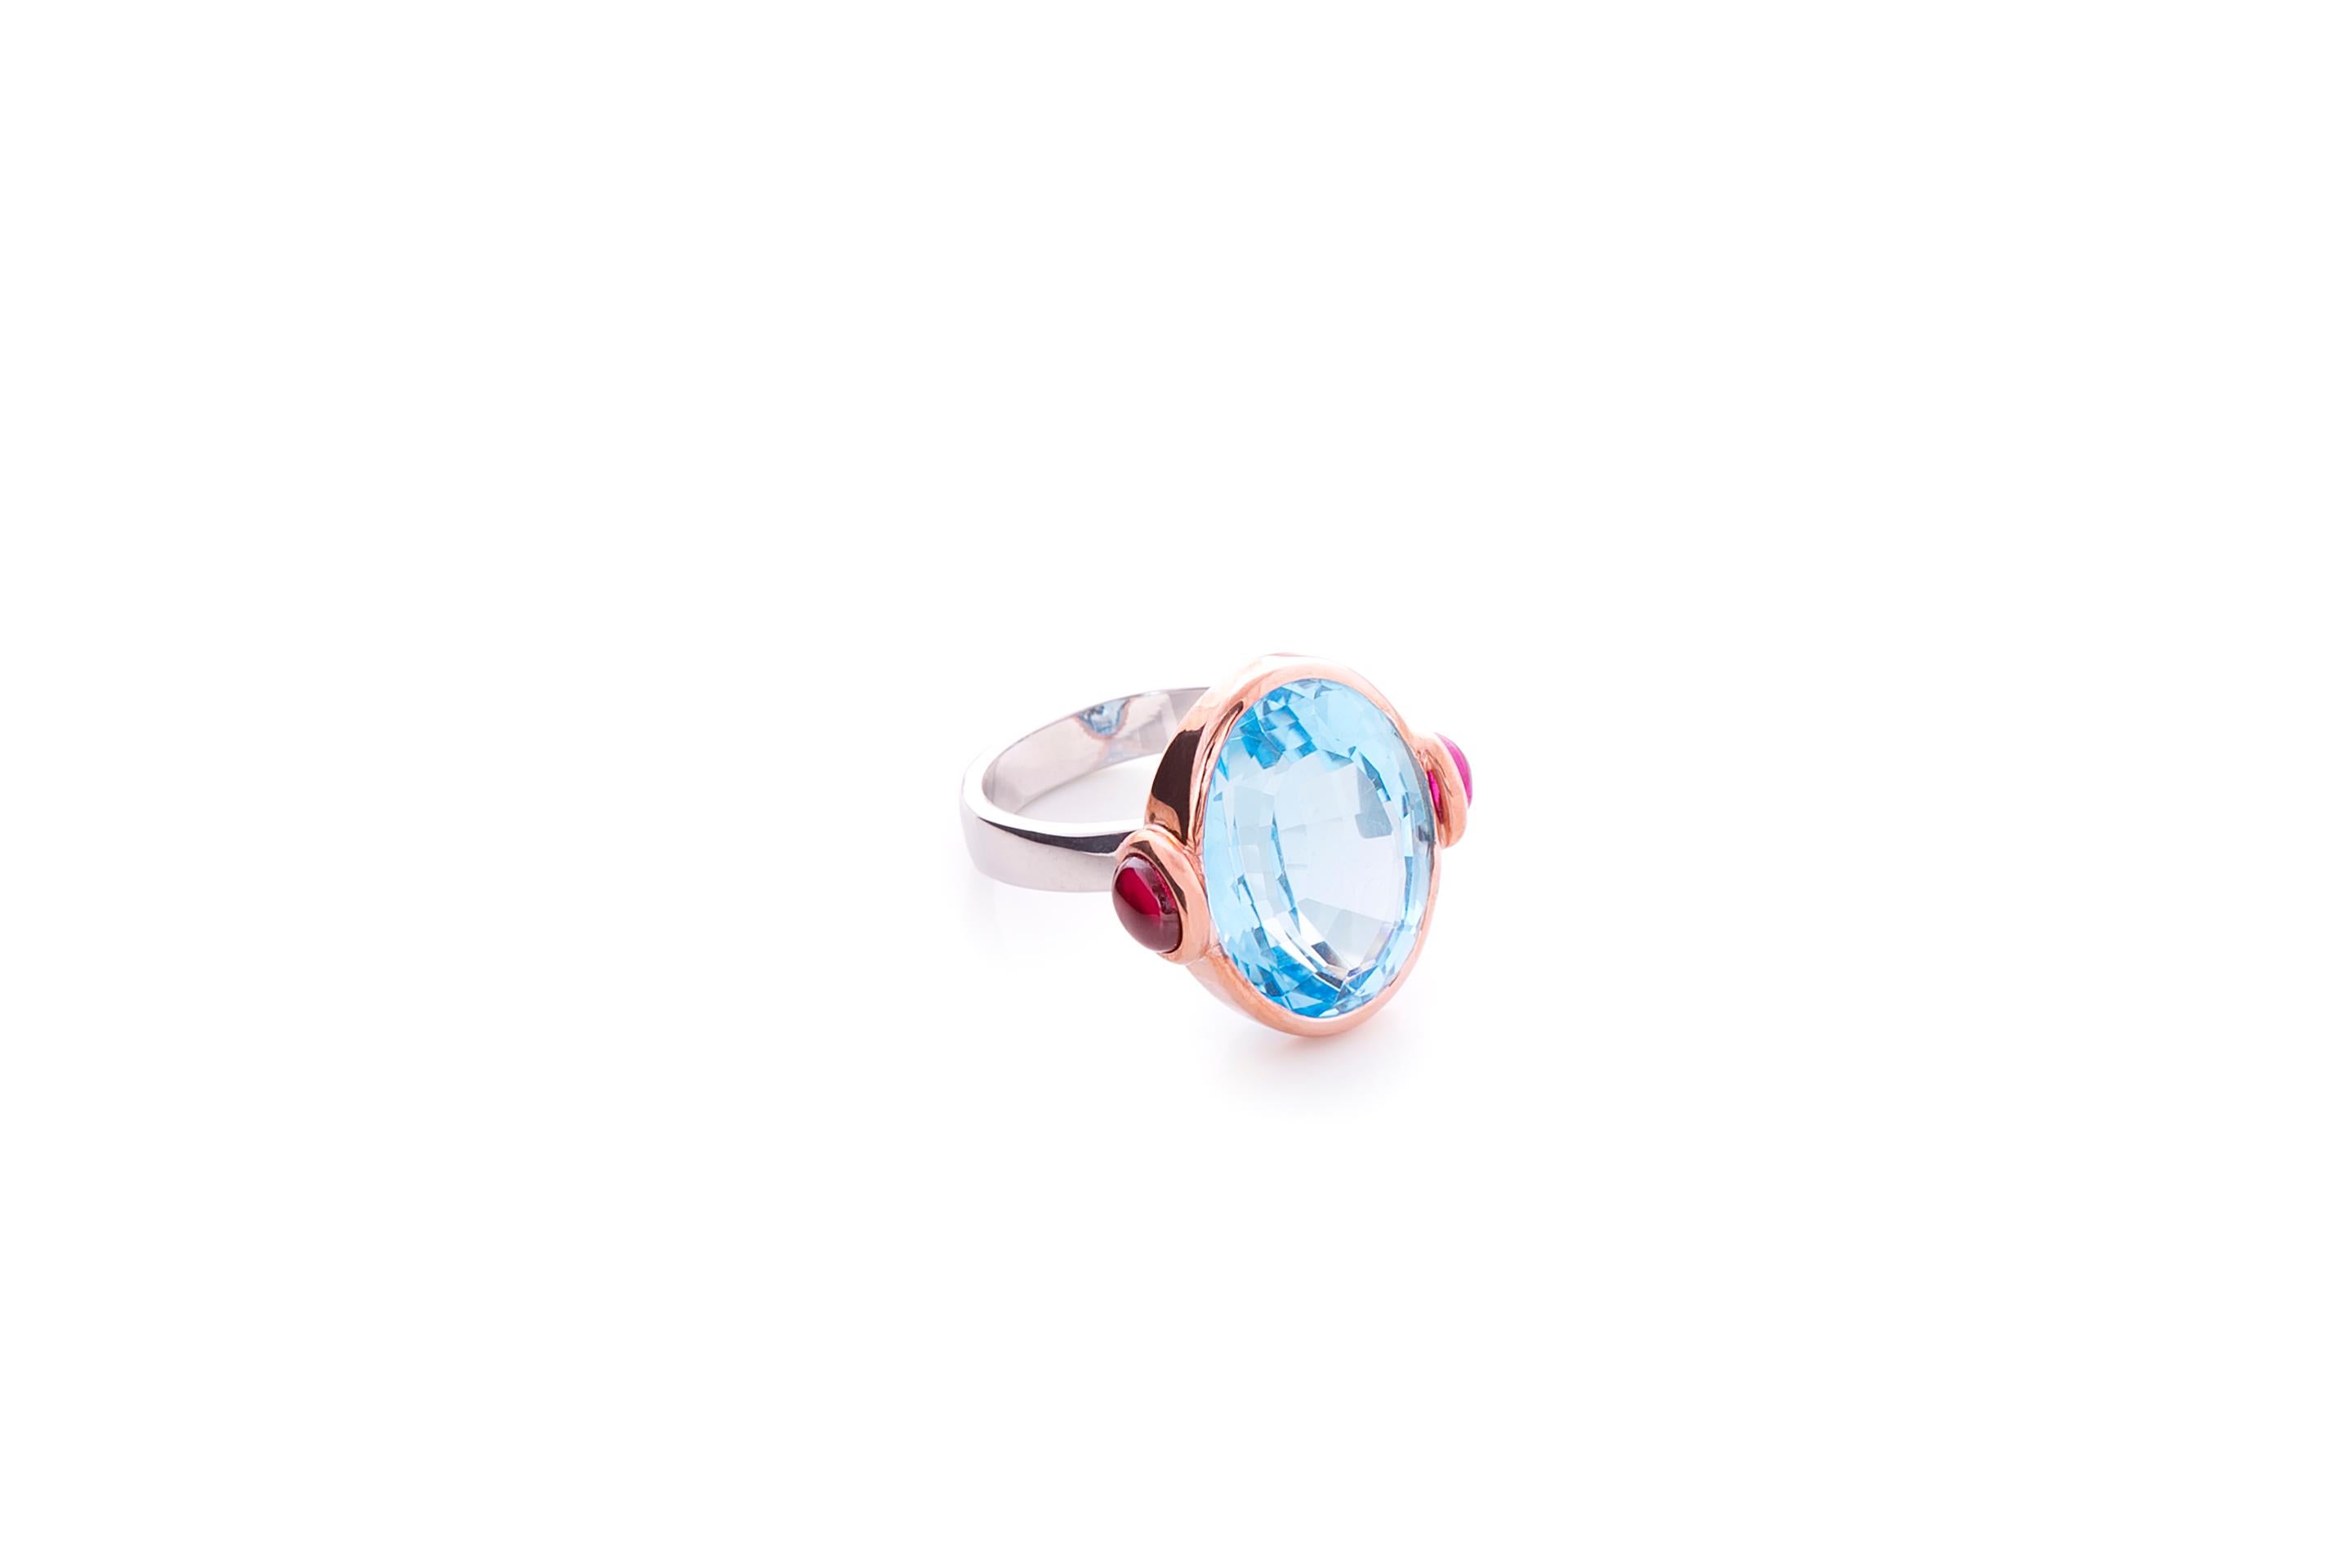 Rossella Ugolini Design Collection Deco Style 18 Karat Gold Topaz Rubelite Cabochon Blue Candy Cocktail Ring
The character of the Blue Topaz Candy ring is almost tangible, thanks certainly to the size of the yellow Citrine gemstone it encompasses, a